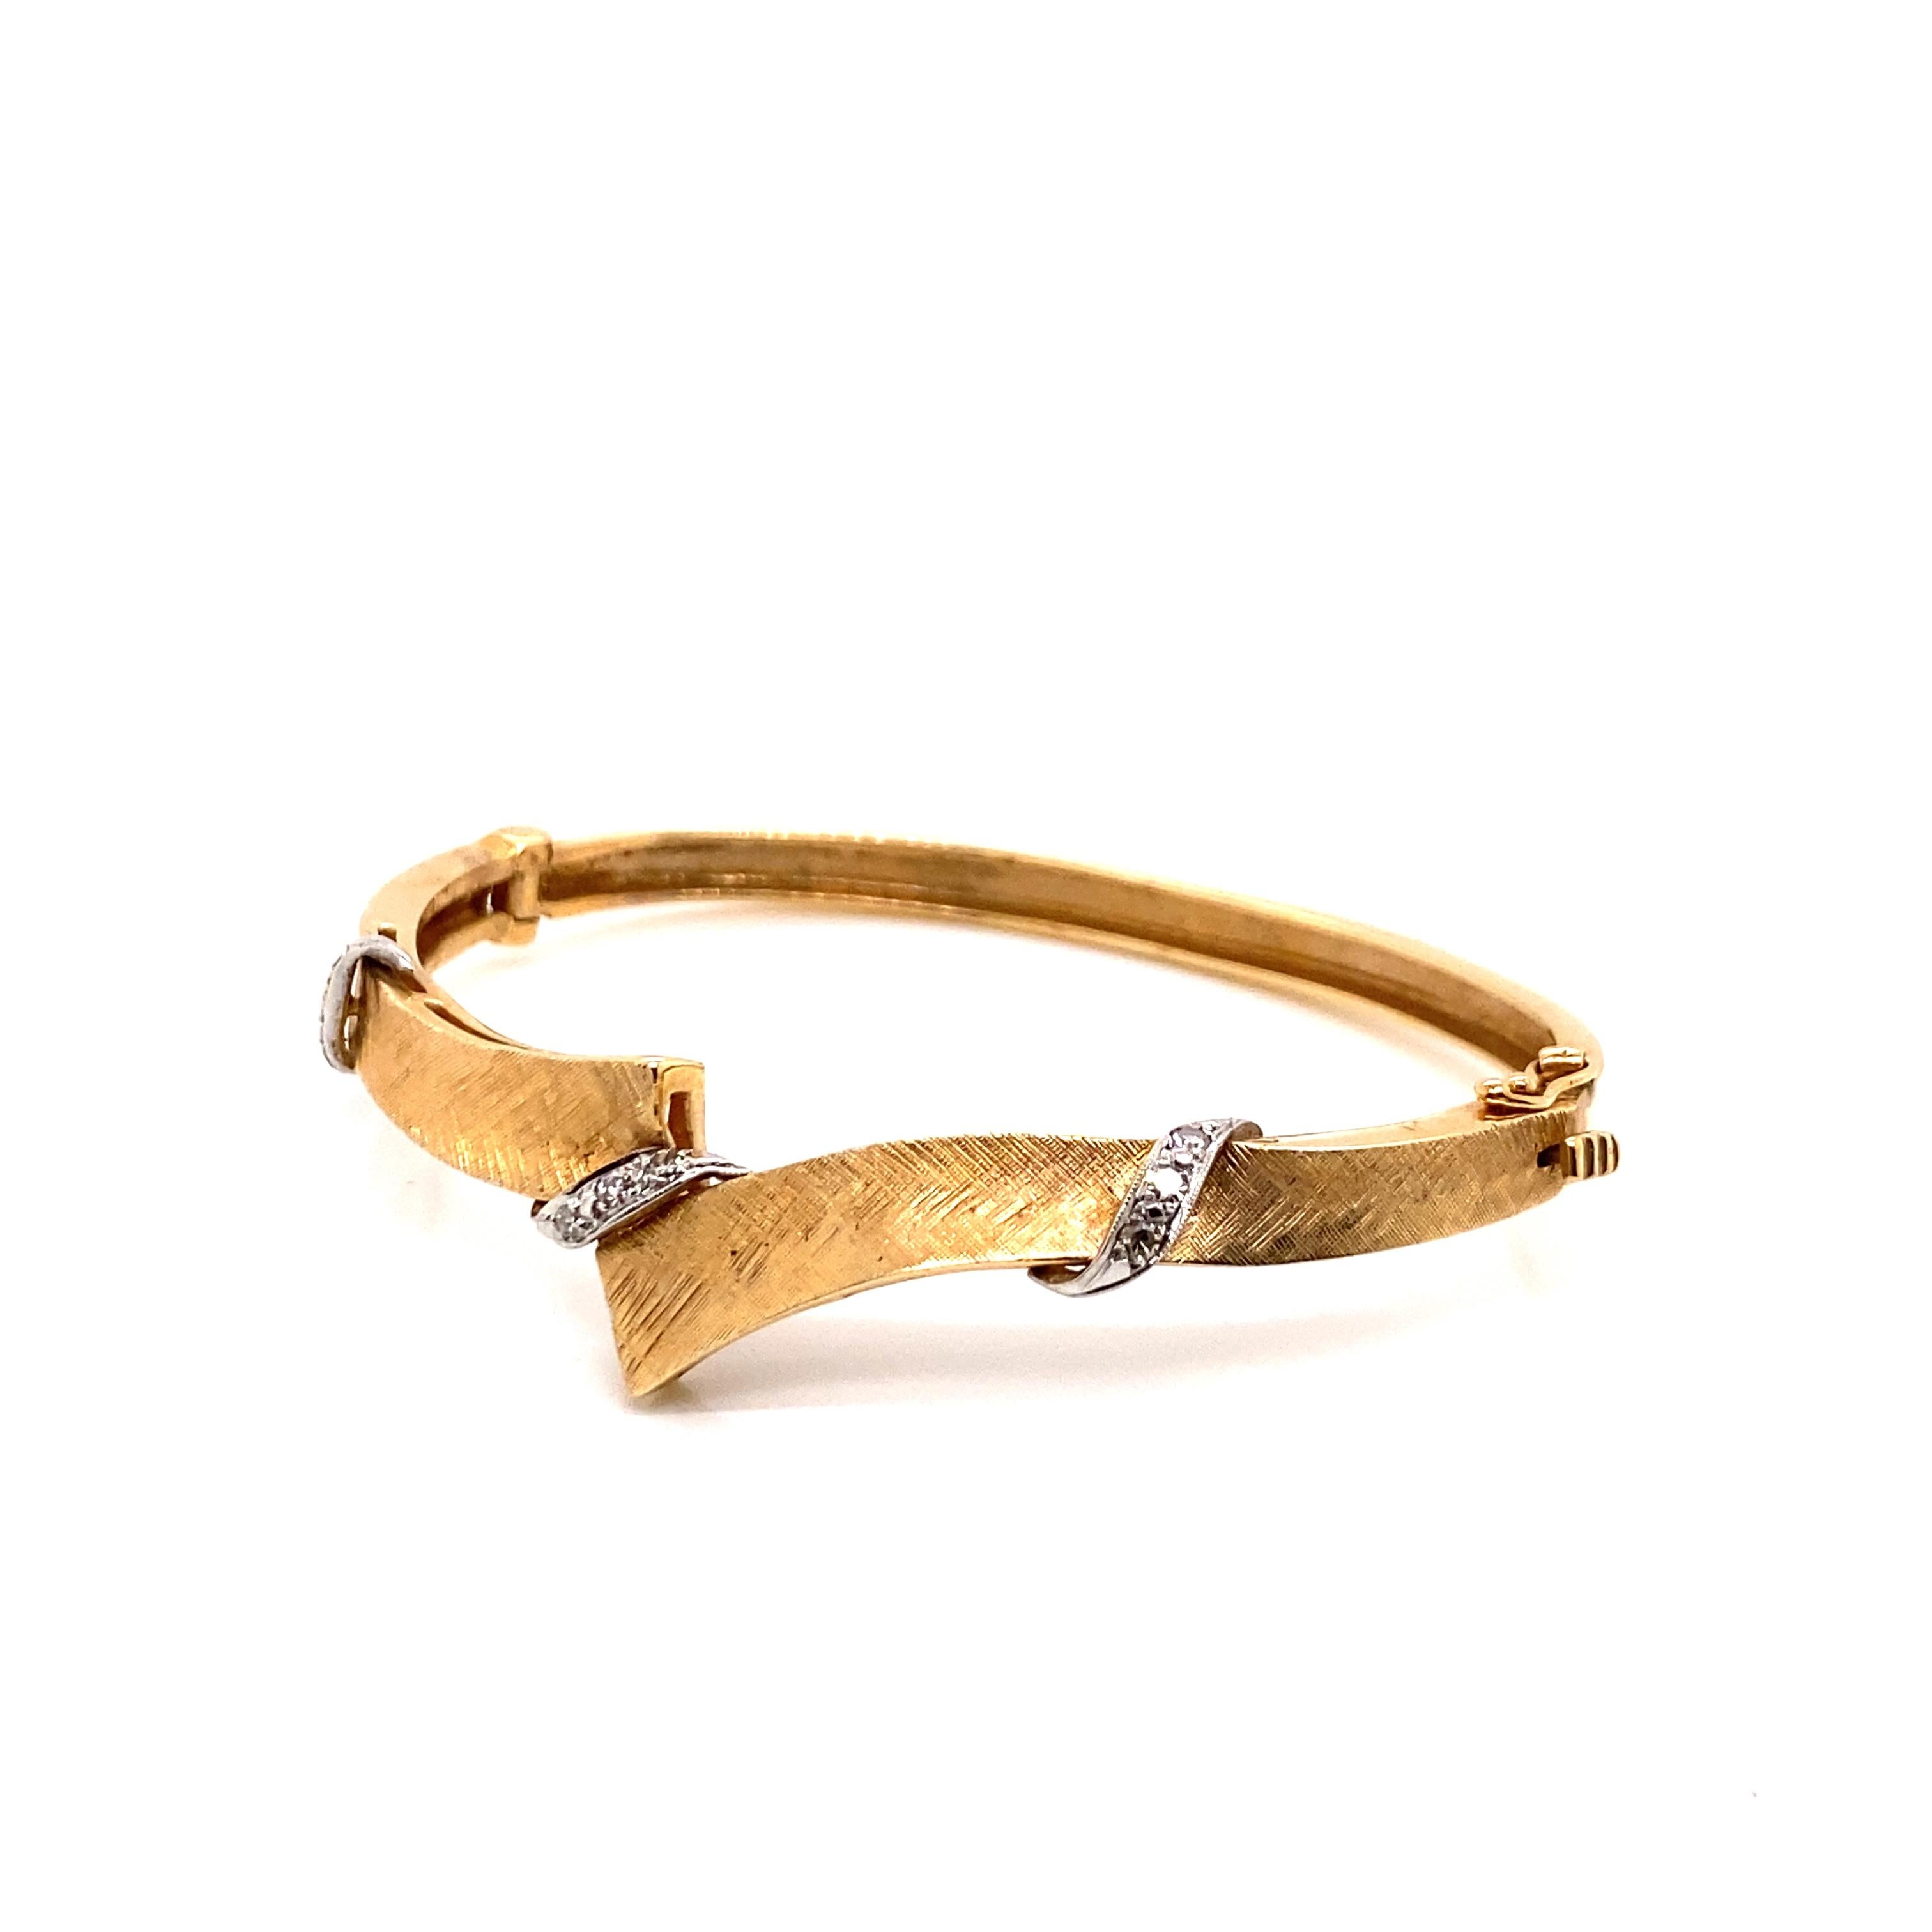 Retro Vintage 1950's 14K Yellow Gold Bangle Bracelet with Diamond Accents For Sale